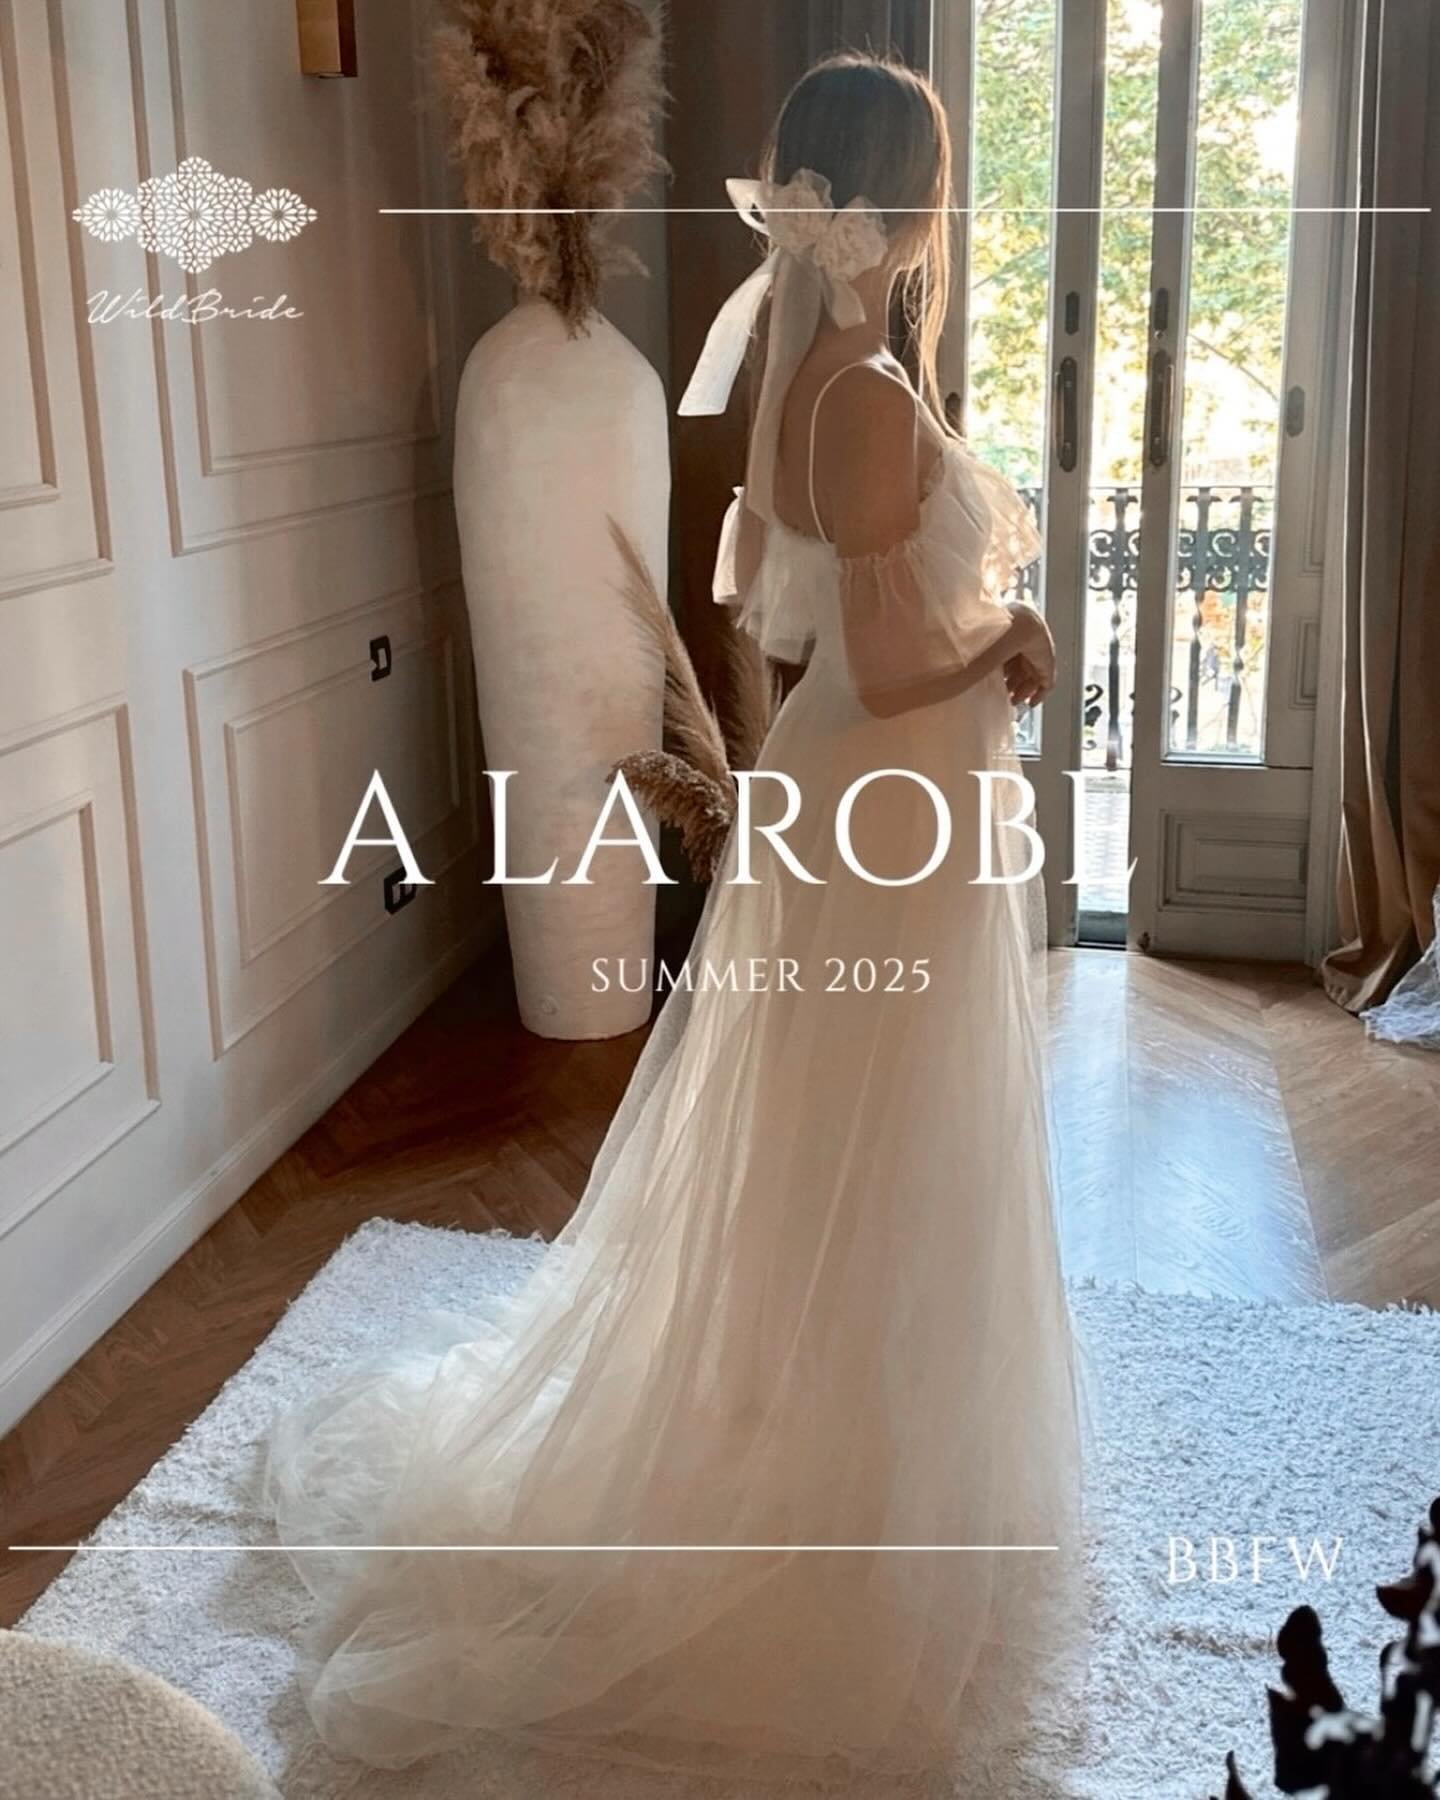 { 𝐁𝐁𝐅𝐖𝟐𝟒 } @alarobe 💕

Master of the bias cut, designer Elizabeth Soljak, makes the most luxurious silk slip wedding gowns. Perfectly cut, her gowns are figure flattering and hug the body in all the right places for so many body types. 

We ca